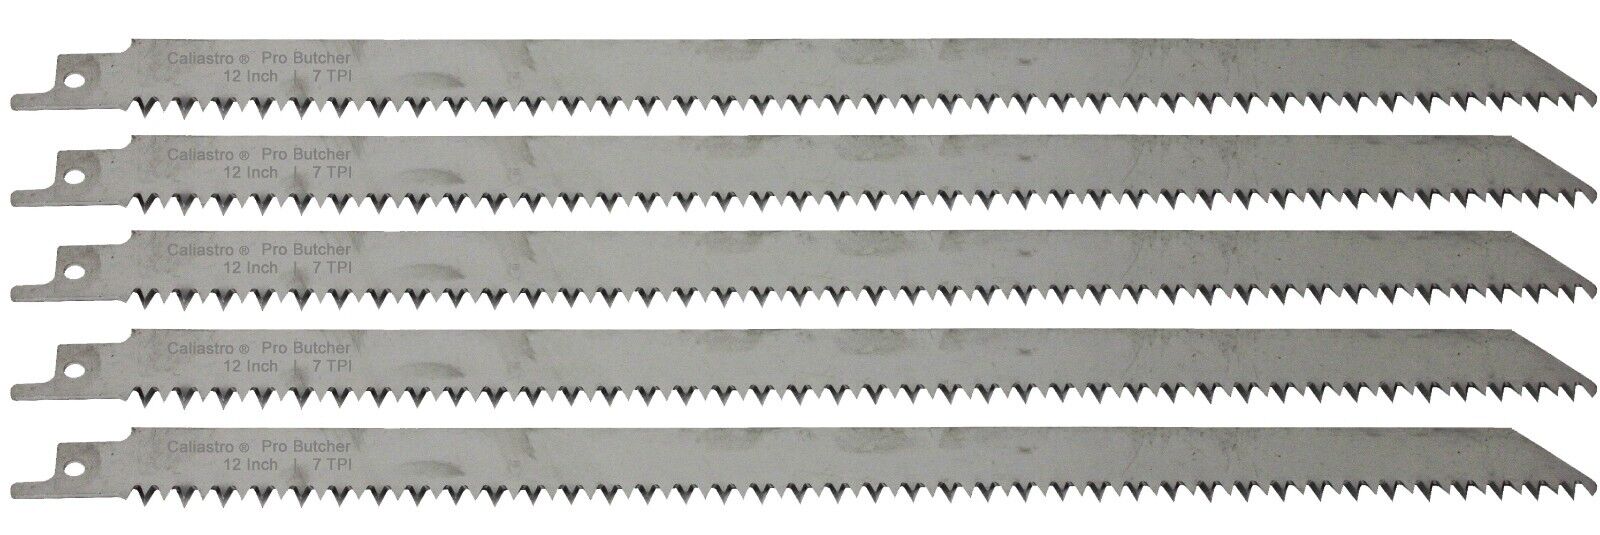 12-Inch Stainless Steel Meat Bone Cutting Reciprocating Saw Blades  5 Pack